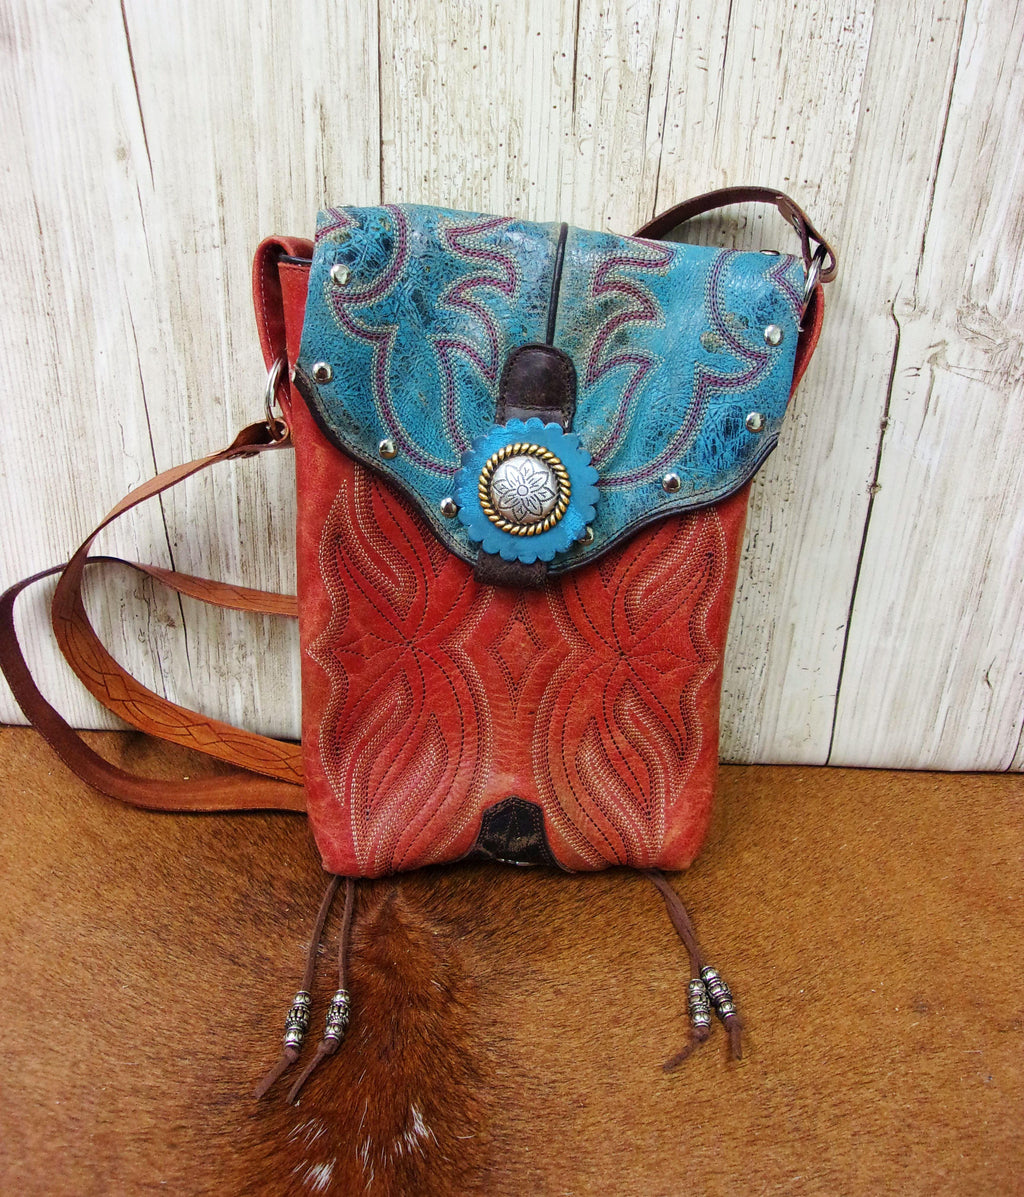 Cowboy Boot Concealed Carry Purse - Crossbody Conceal Carry Purse CB162 cowboy boot purses, western fringe purse, handmade leather purses, boot purse, handmade western purse, custom leather handbags Chris Thompson Bags